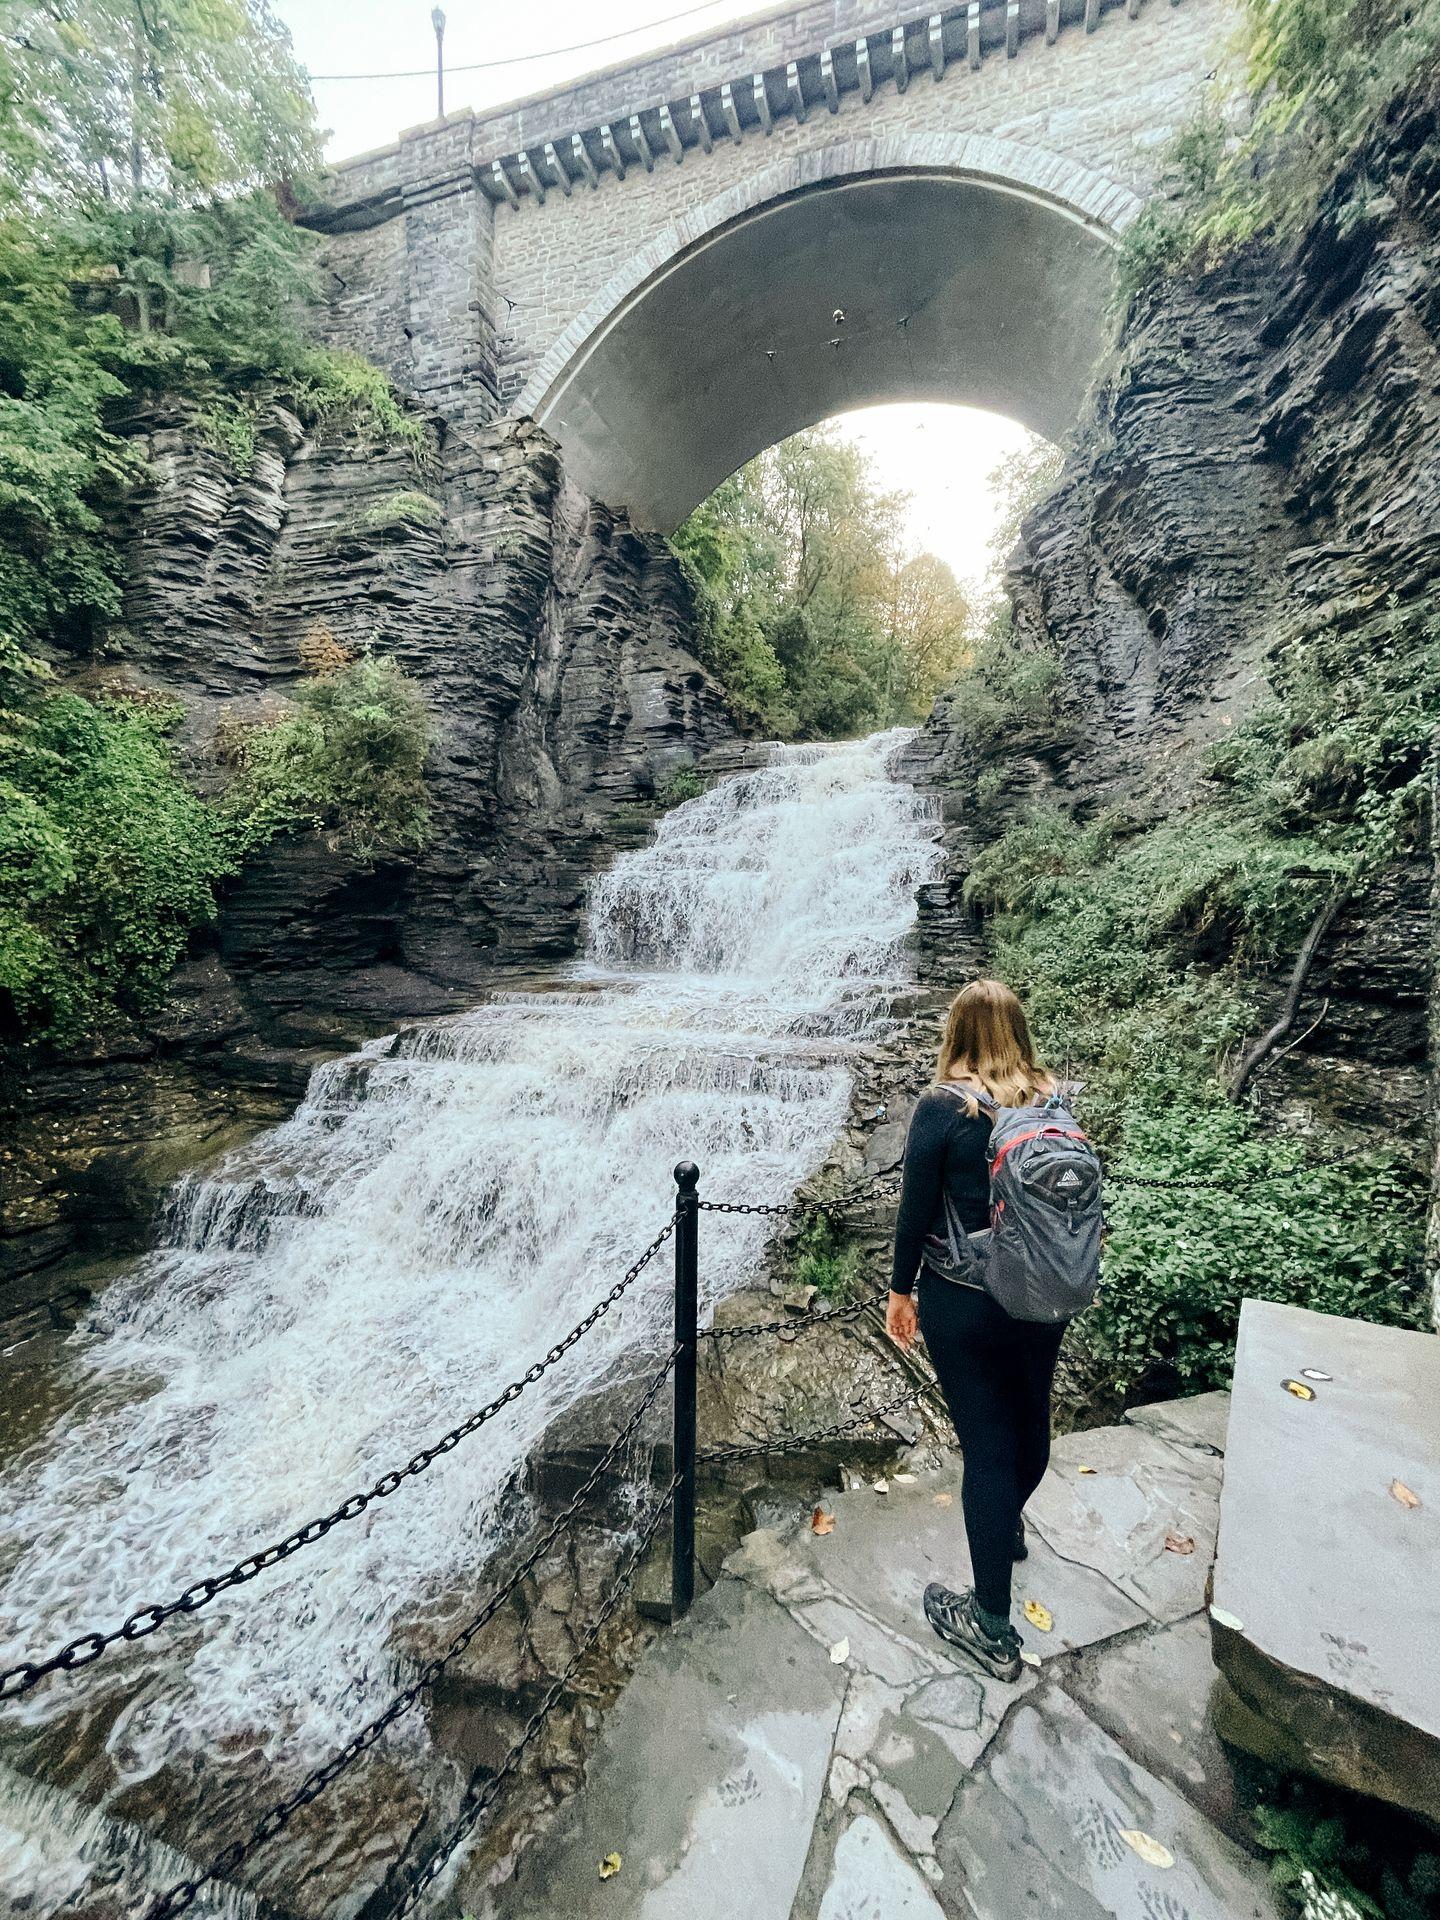 Lydia standing and looking out at a waterfall on the Cascadilla Gorge Trail. There is a stone bridge above the waterfall.